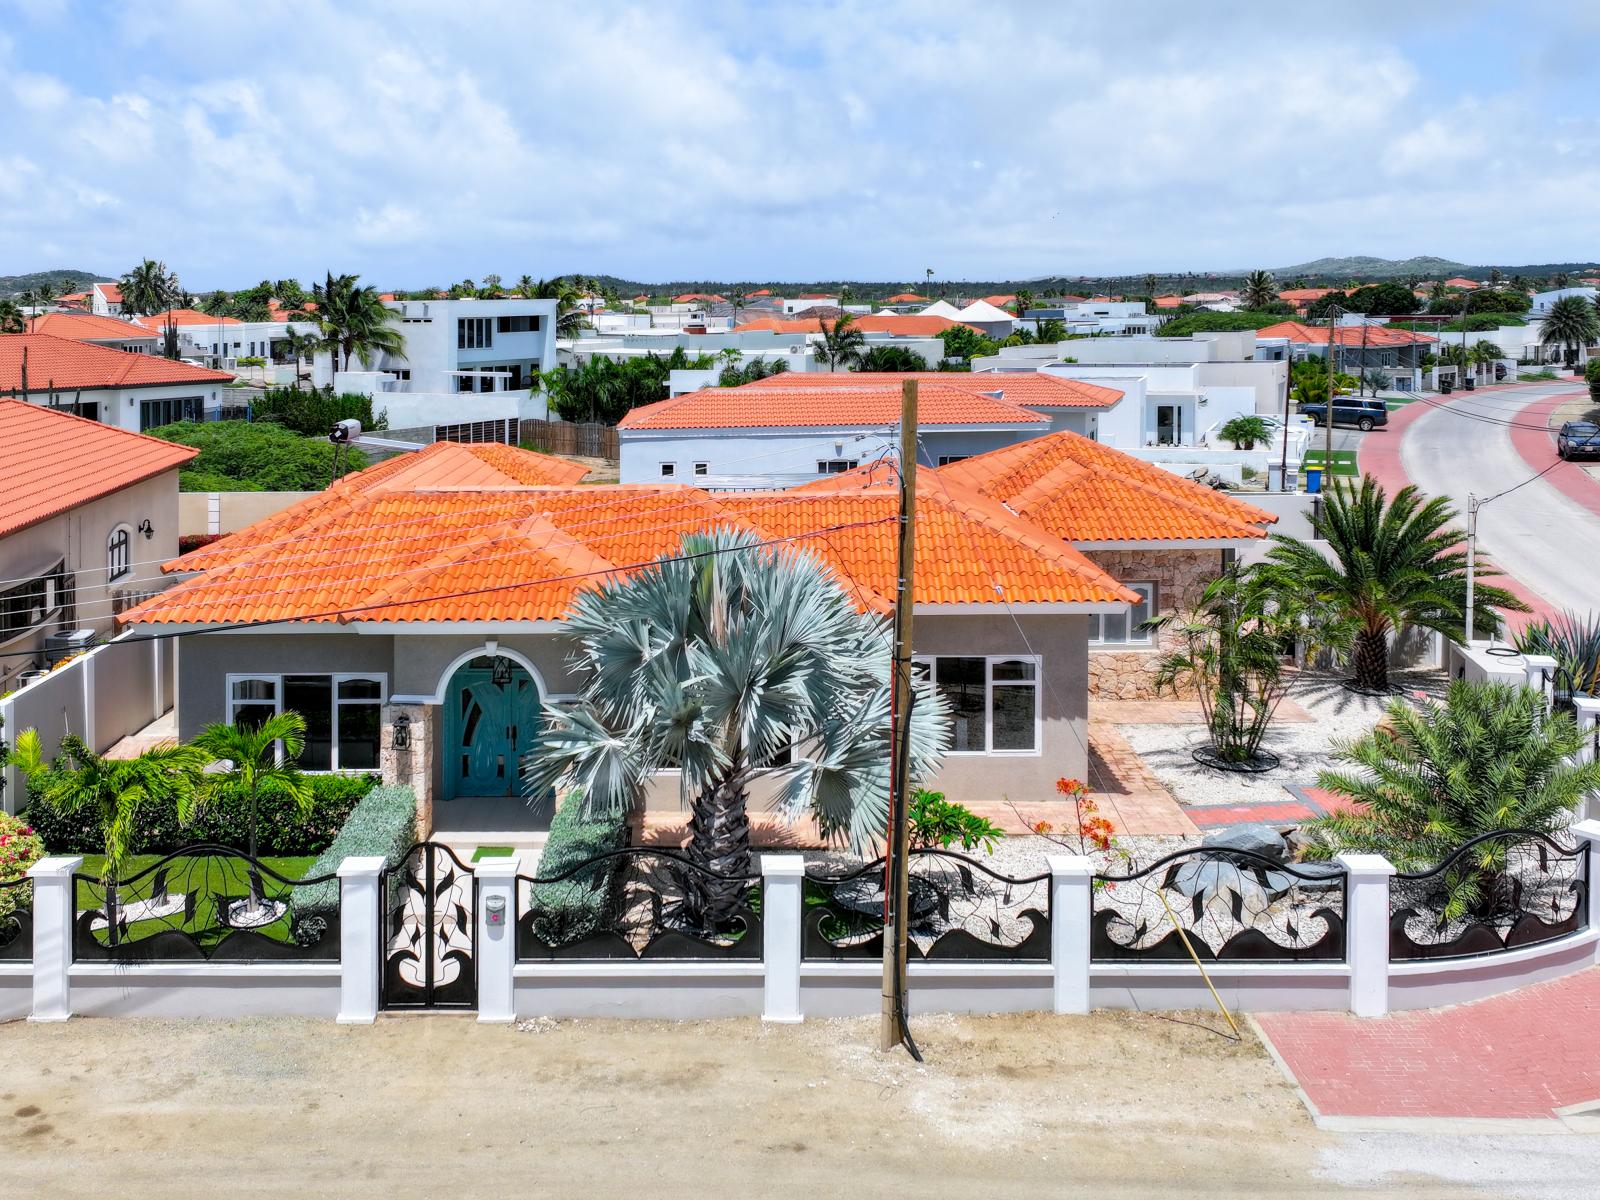 Inviting Home in Noord Aruba - Front View of the Home - Peaceful and quite Neighborhood - Palm trees and tropical plants enhance the vacation feel